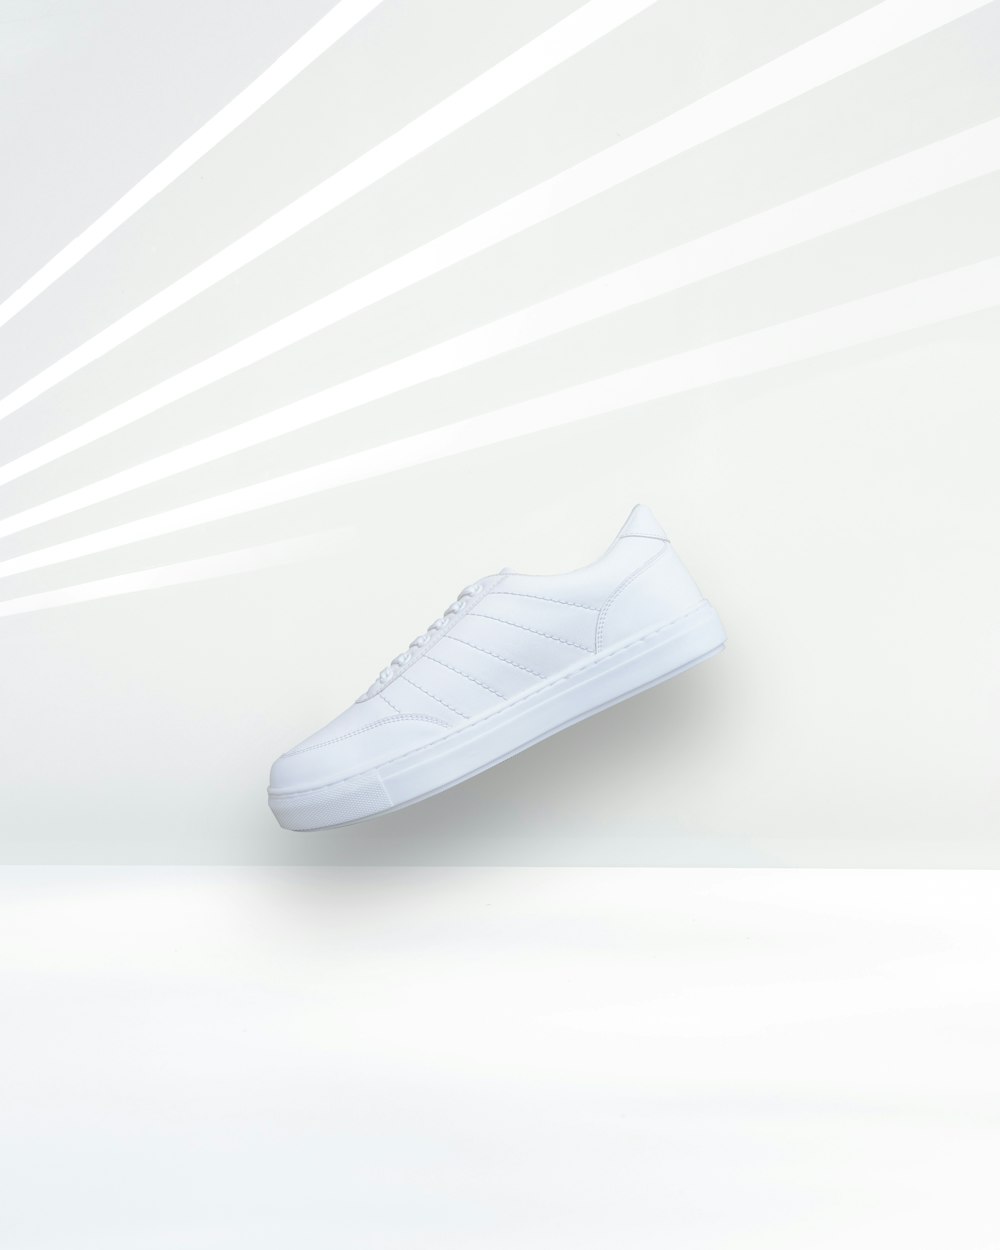 white nike low top sneakers photo – Free Product photography Image on  Unsplash